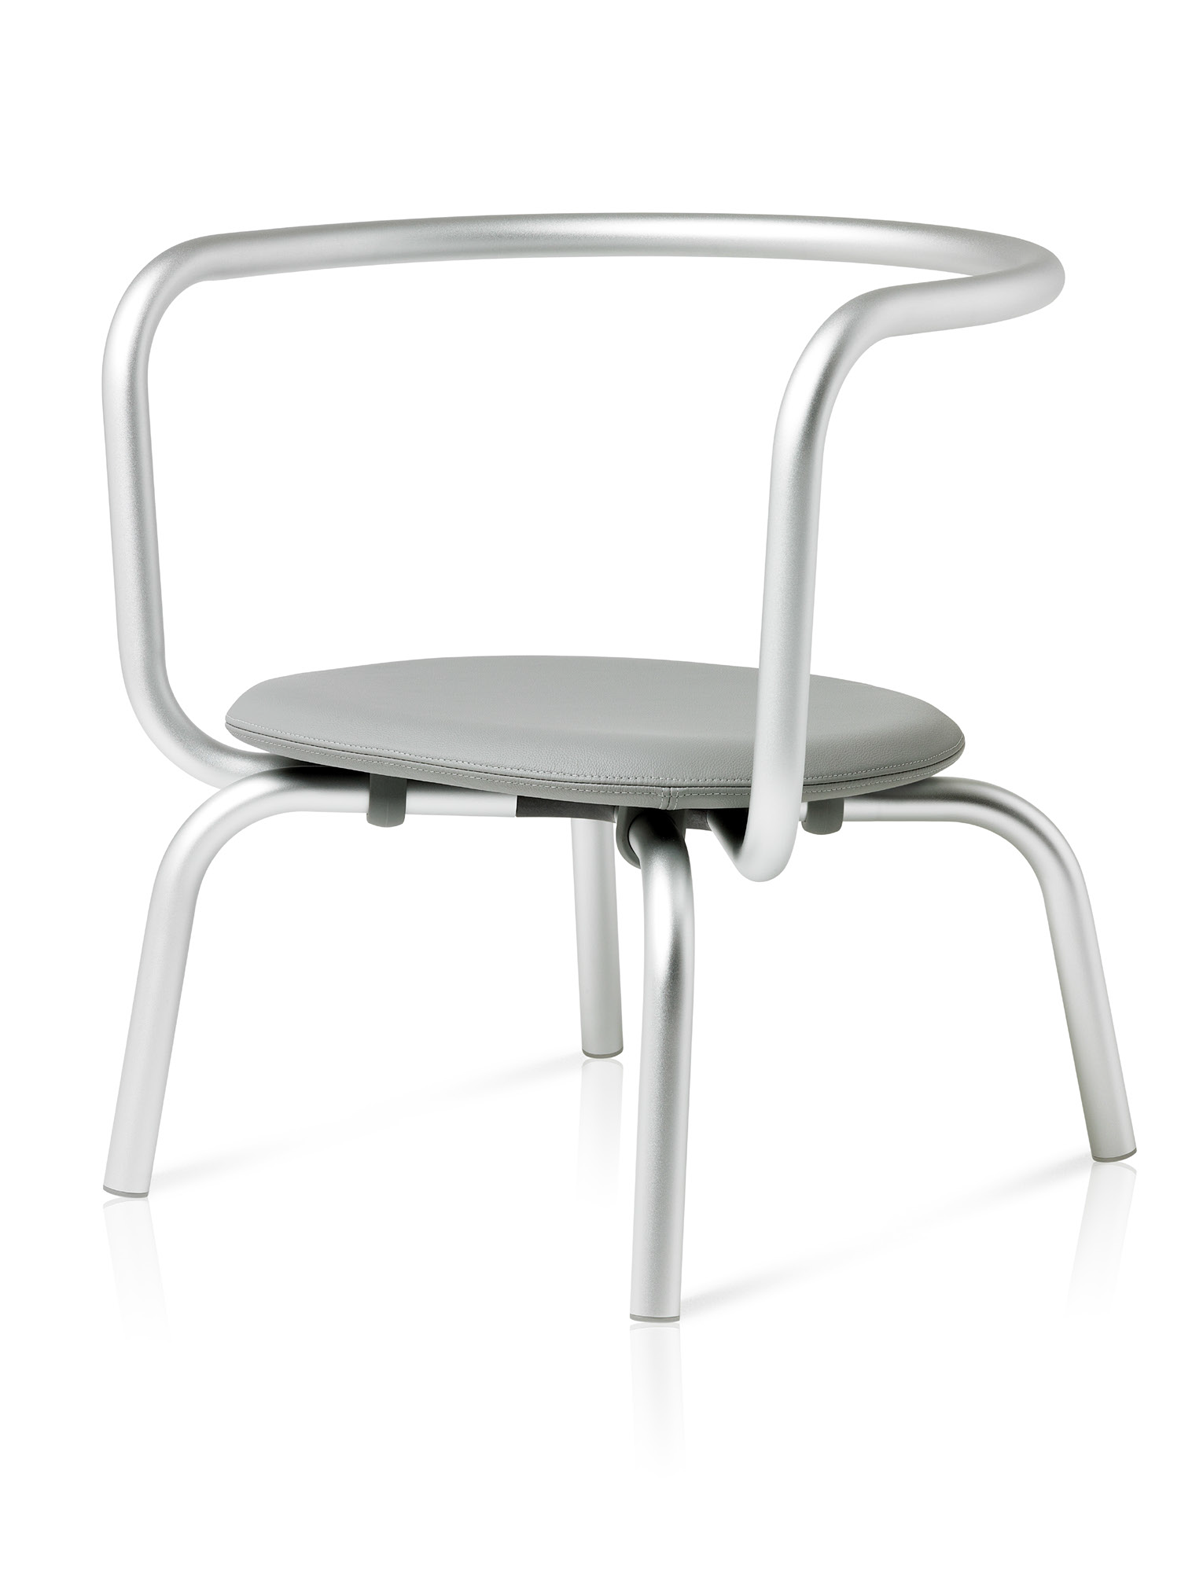 Parrish Collection by Konstantin Grcic per Emeco